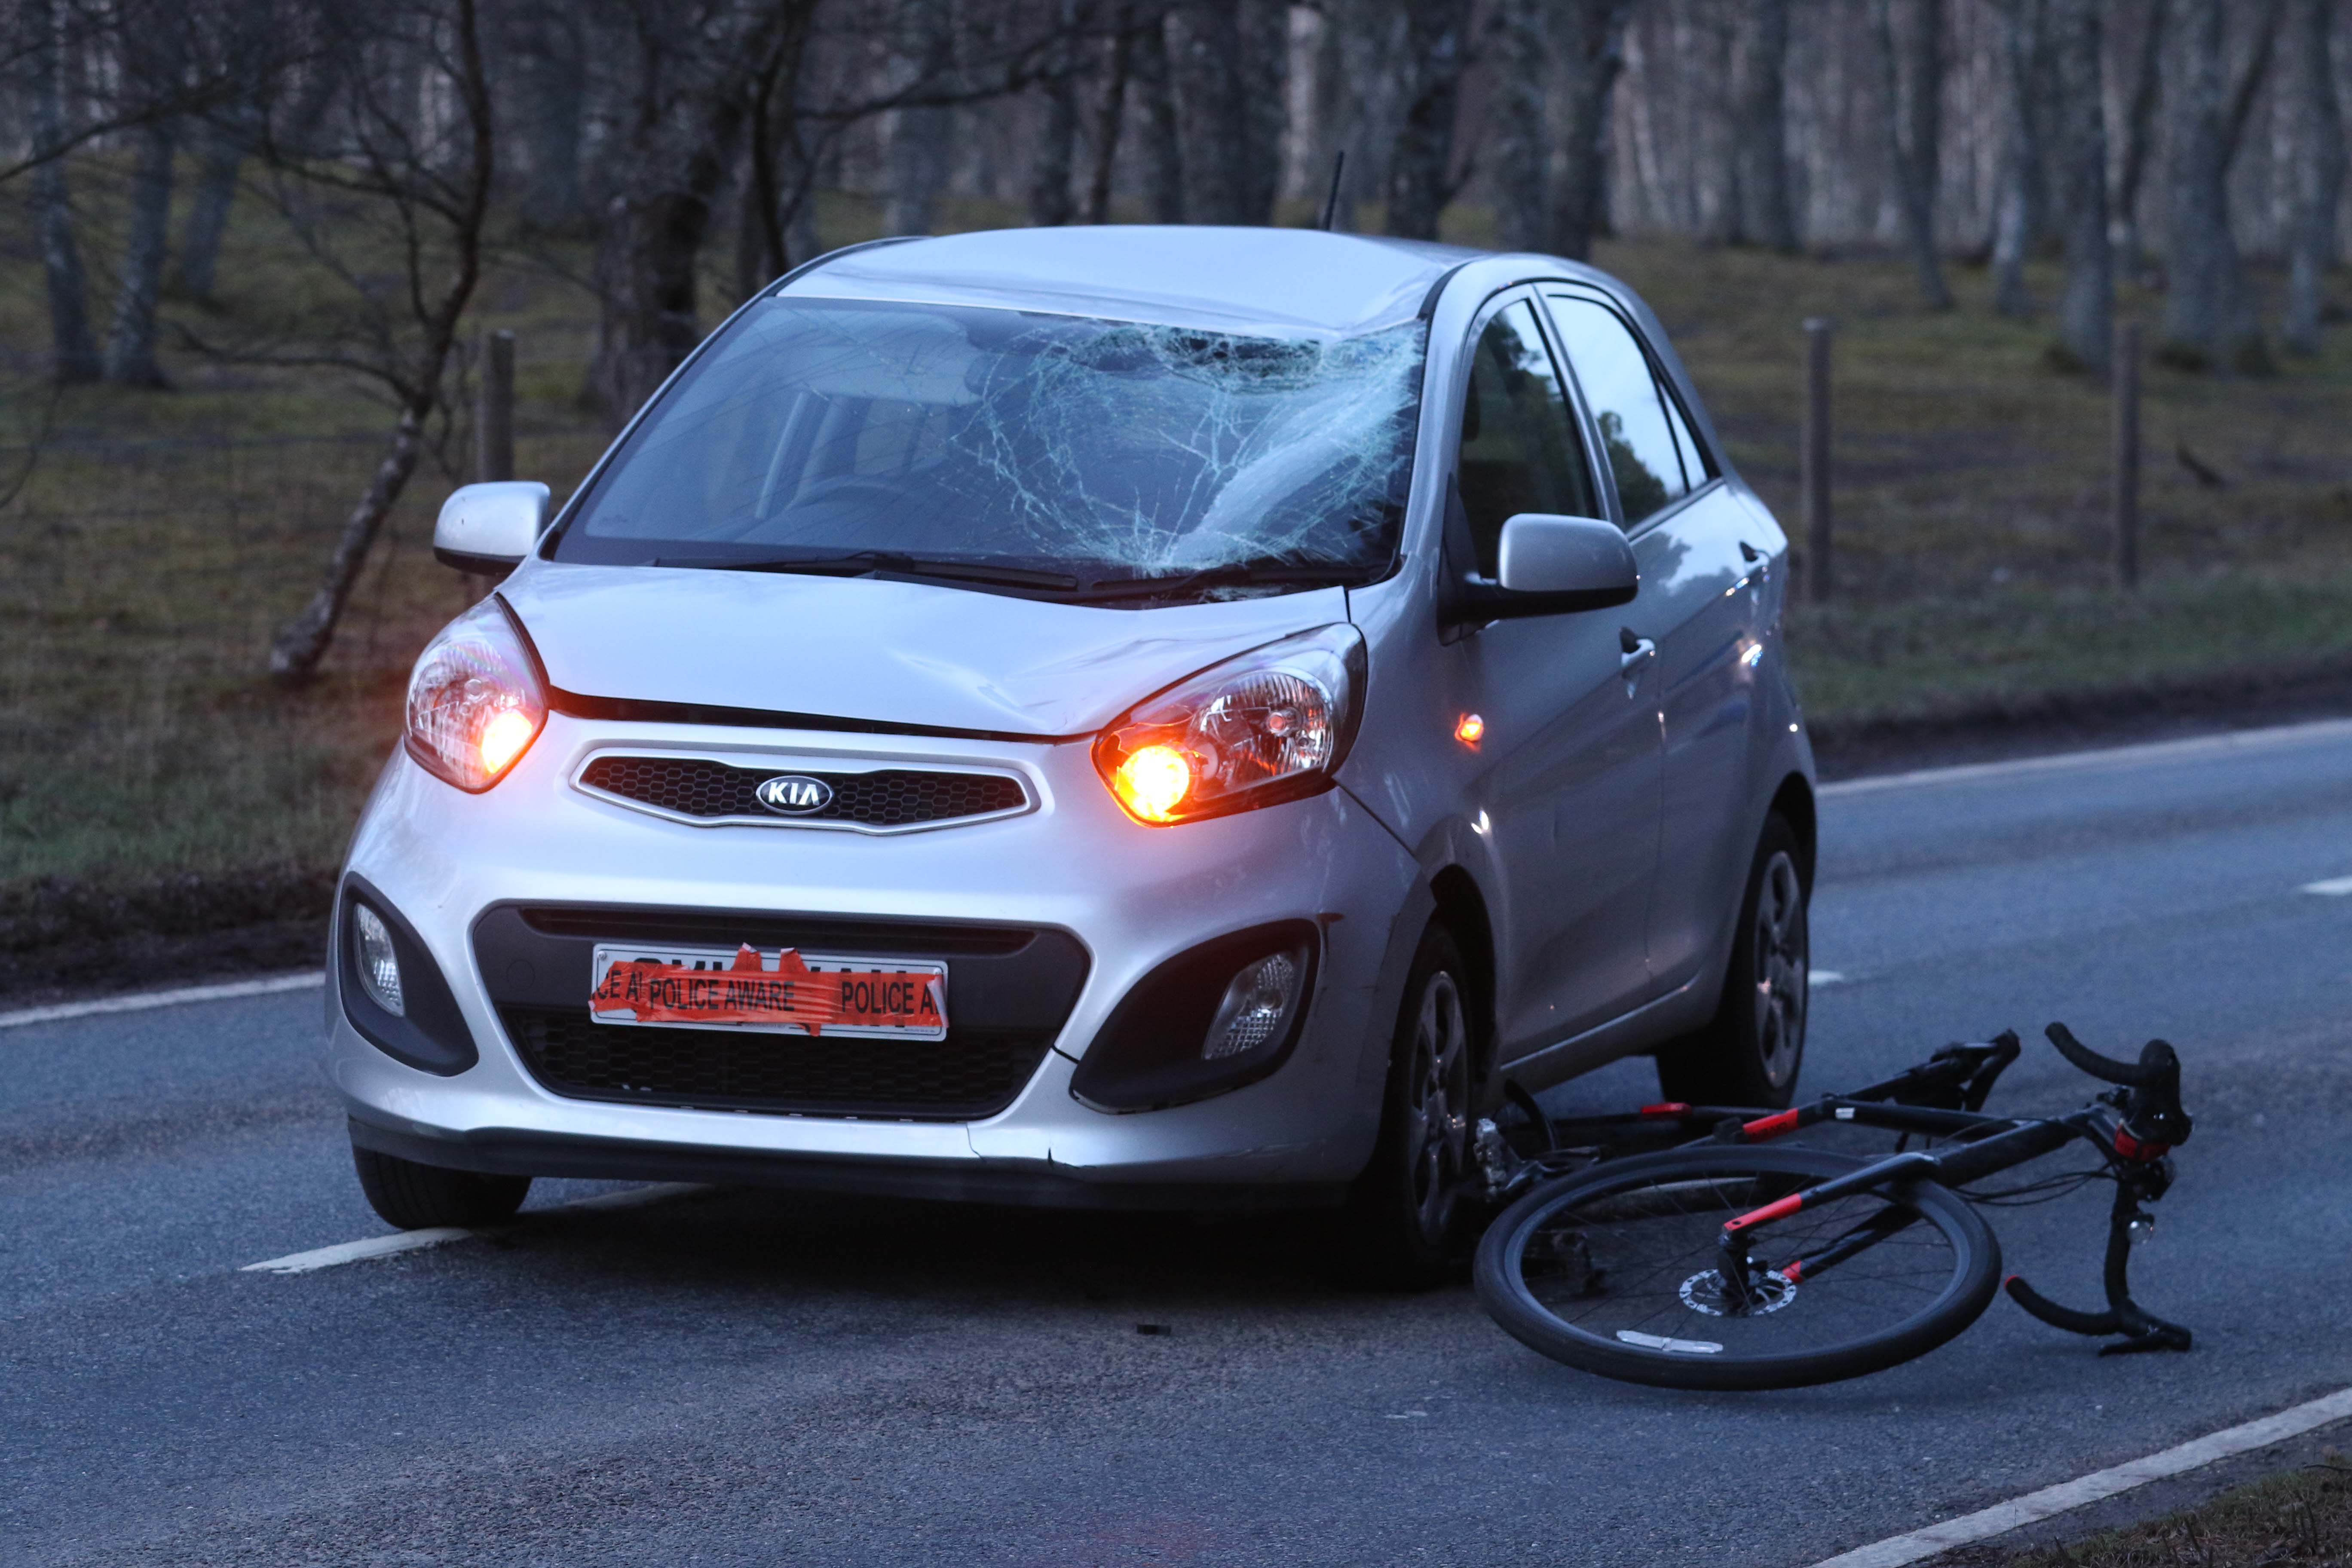 The incident involved a silver Kia car and a cyclist on the B9152 near Aviemore on Monday.